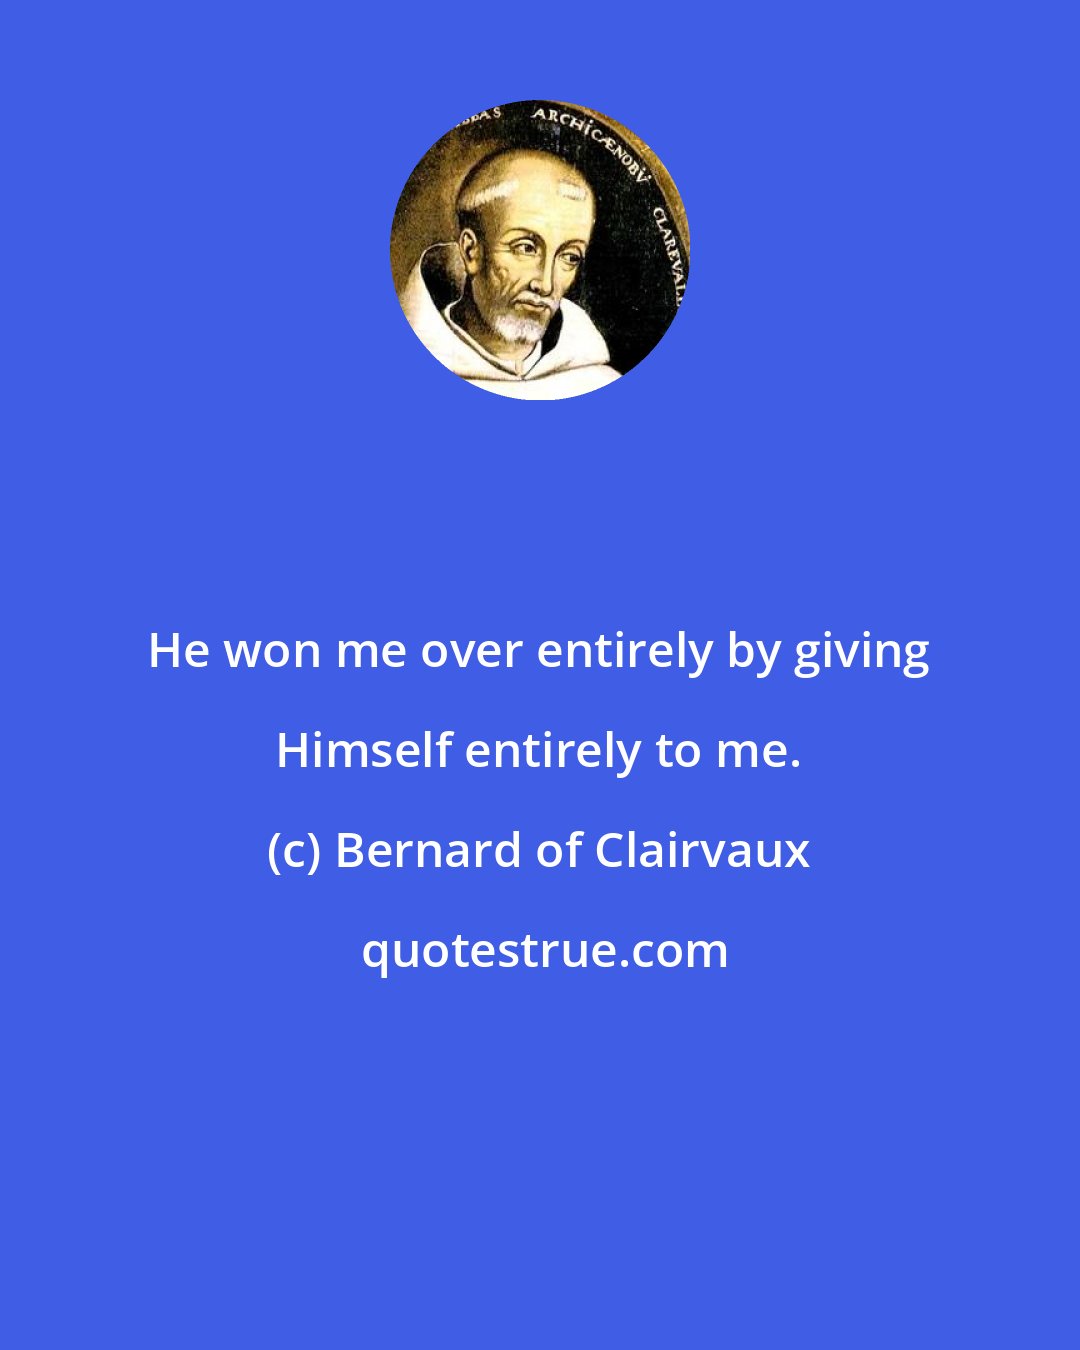 Bernard of Clairvaux: He won me over entirely by giving Himself entirely to me.